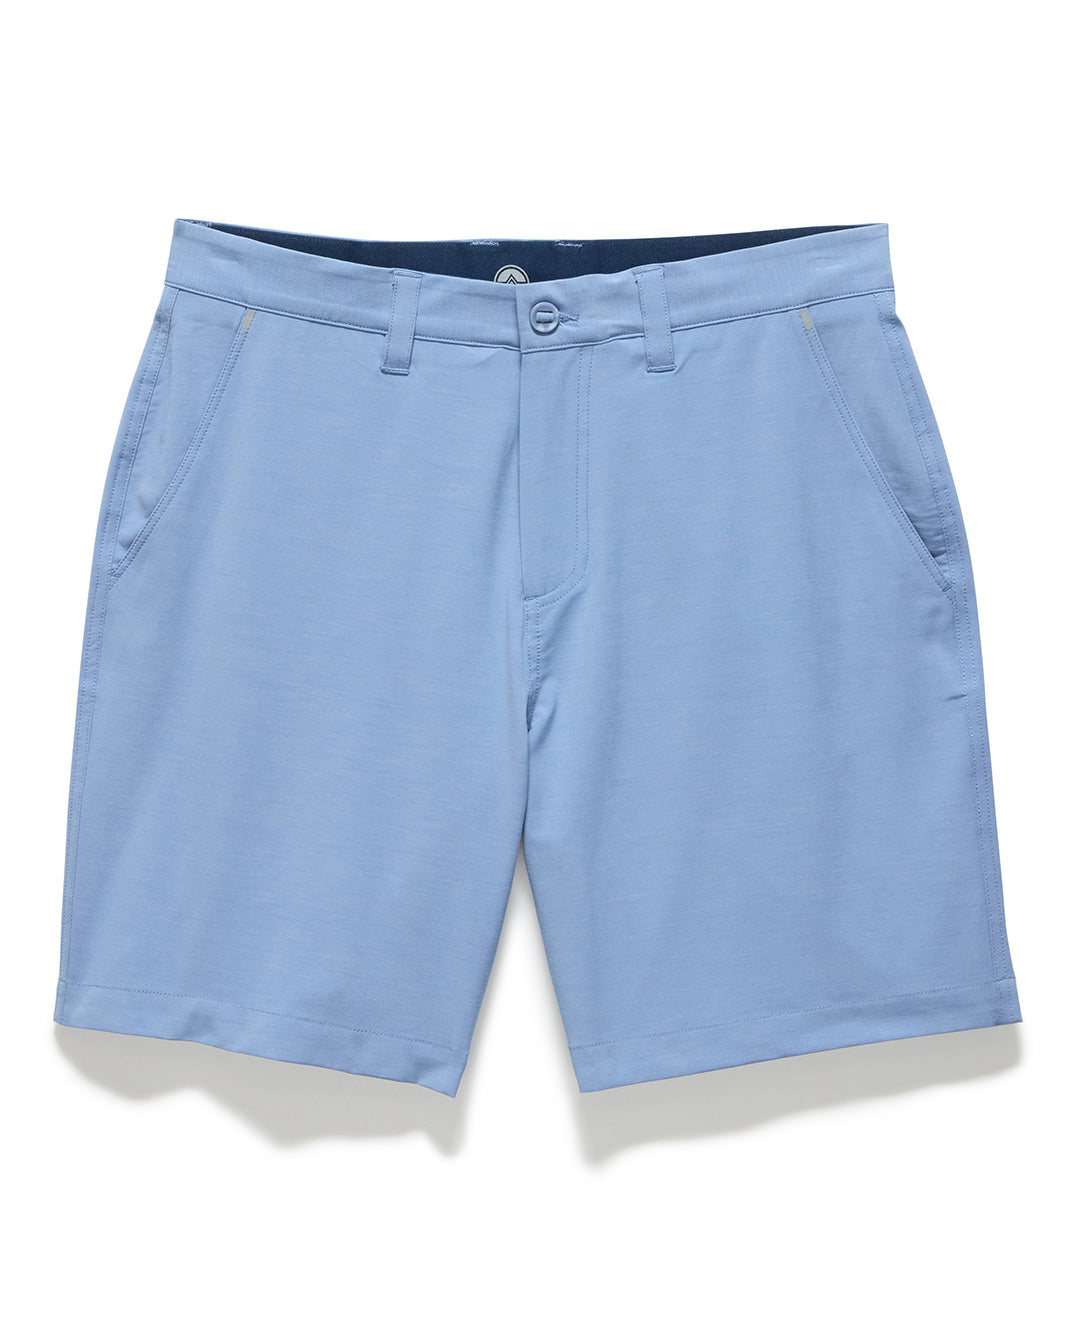 COTTON BLEND ANY-WEAR PERFORMANCE SHORT - 8" INSEAM